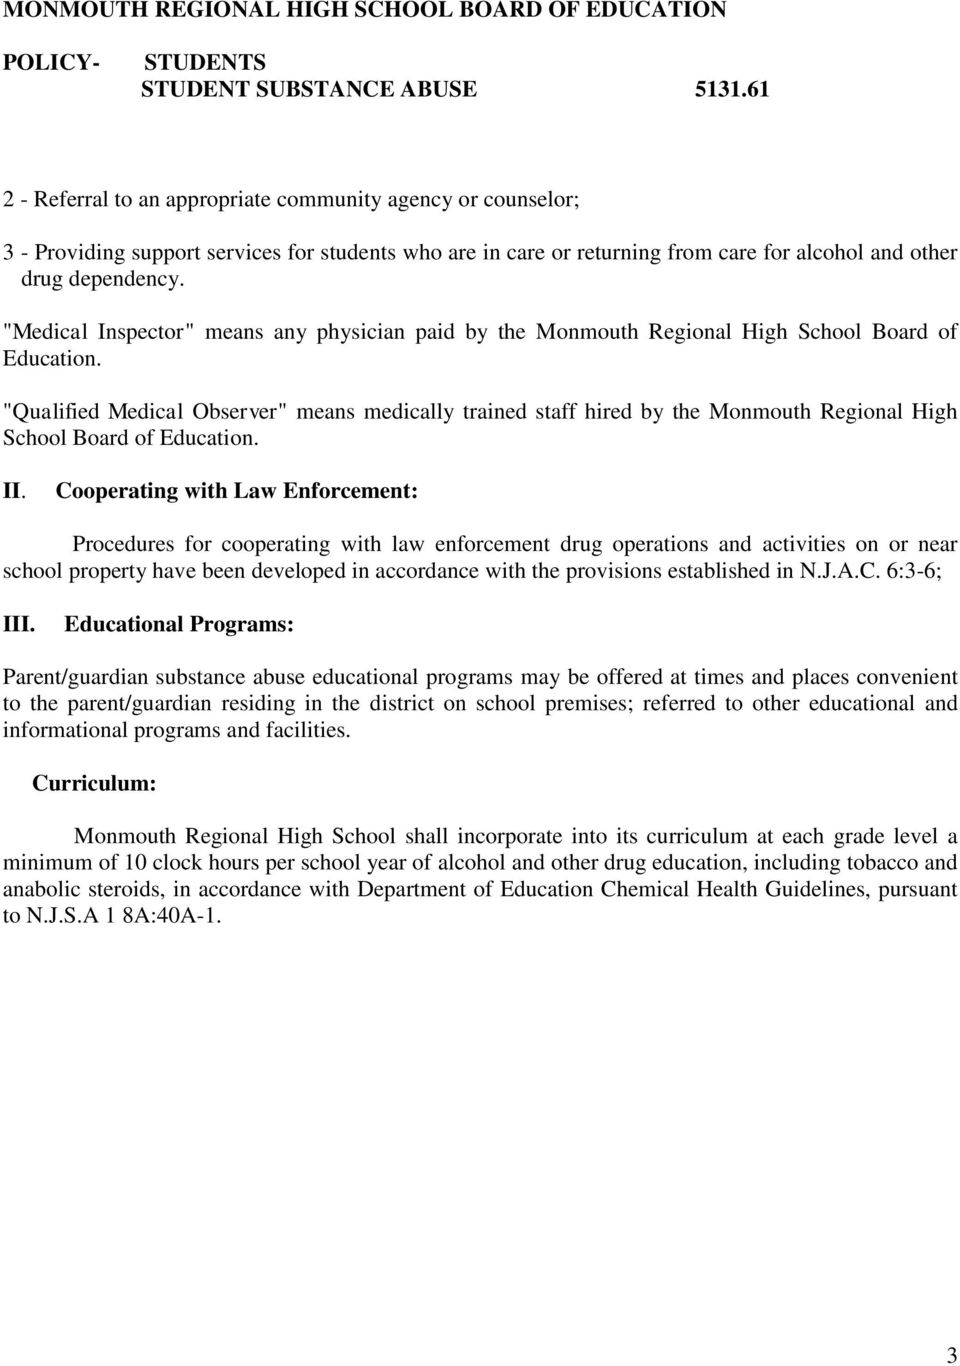 "Qualified Medical Observer" means medically trained staff hired by the Monmouth Regional High School Board of Education. II.